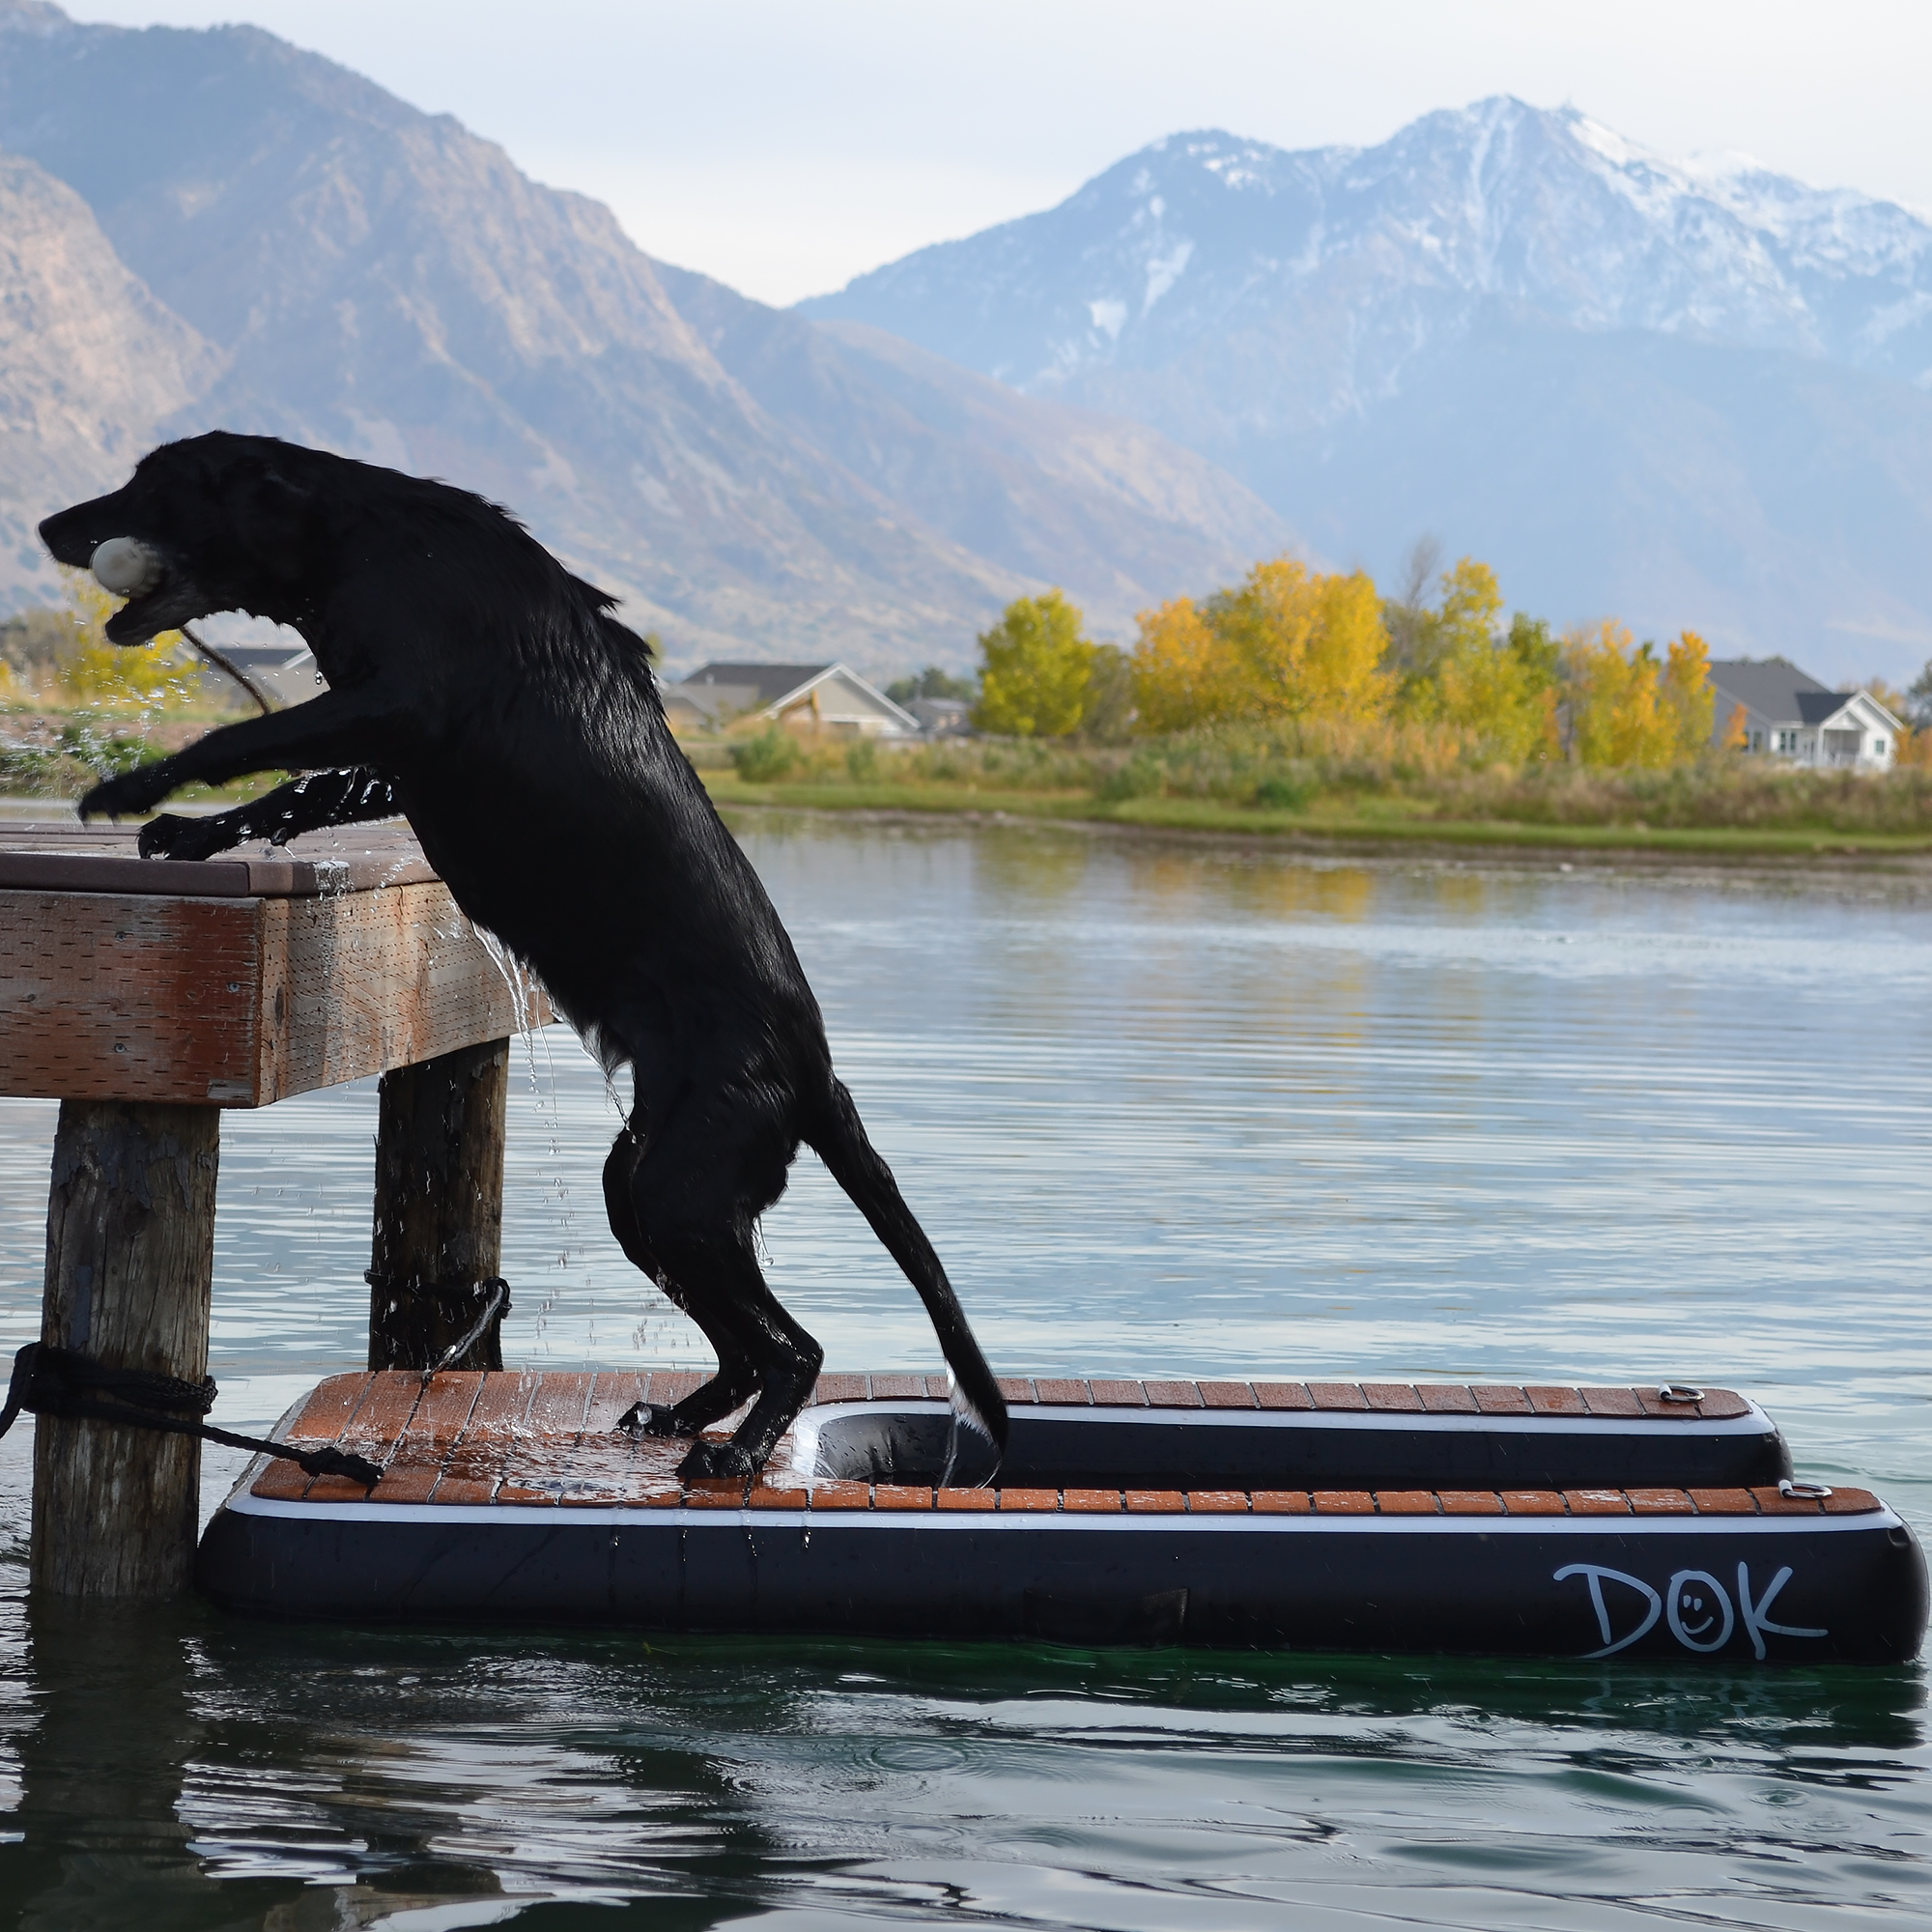 wet dog using the Dog-DOK as a dock ramp for dogs